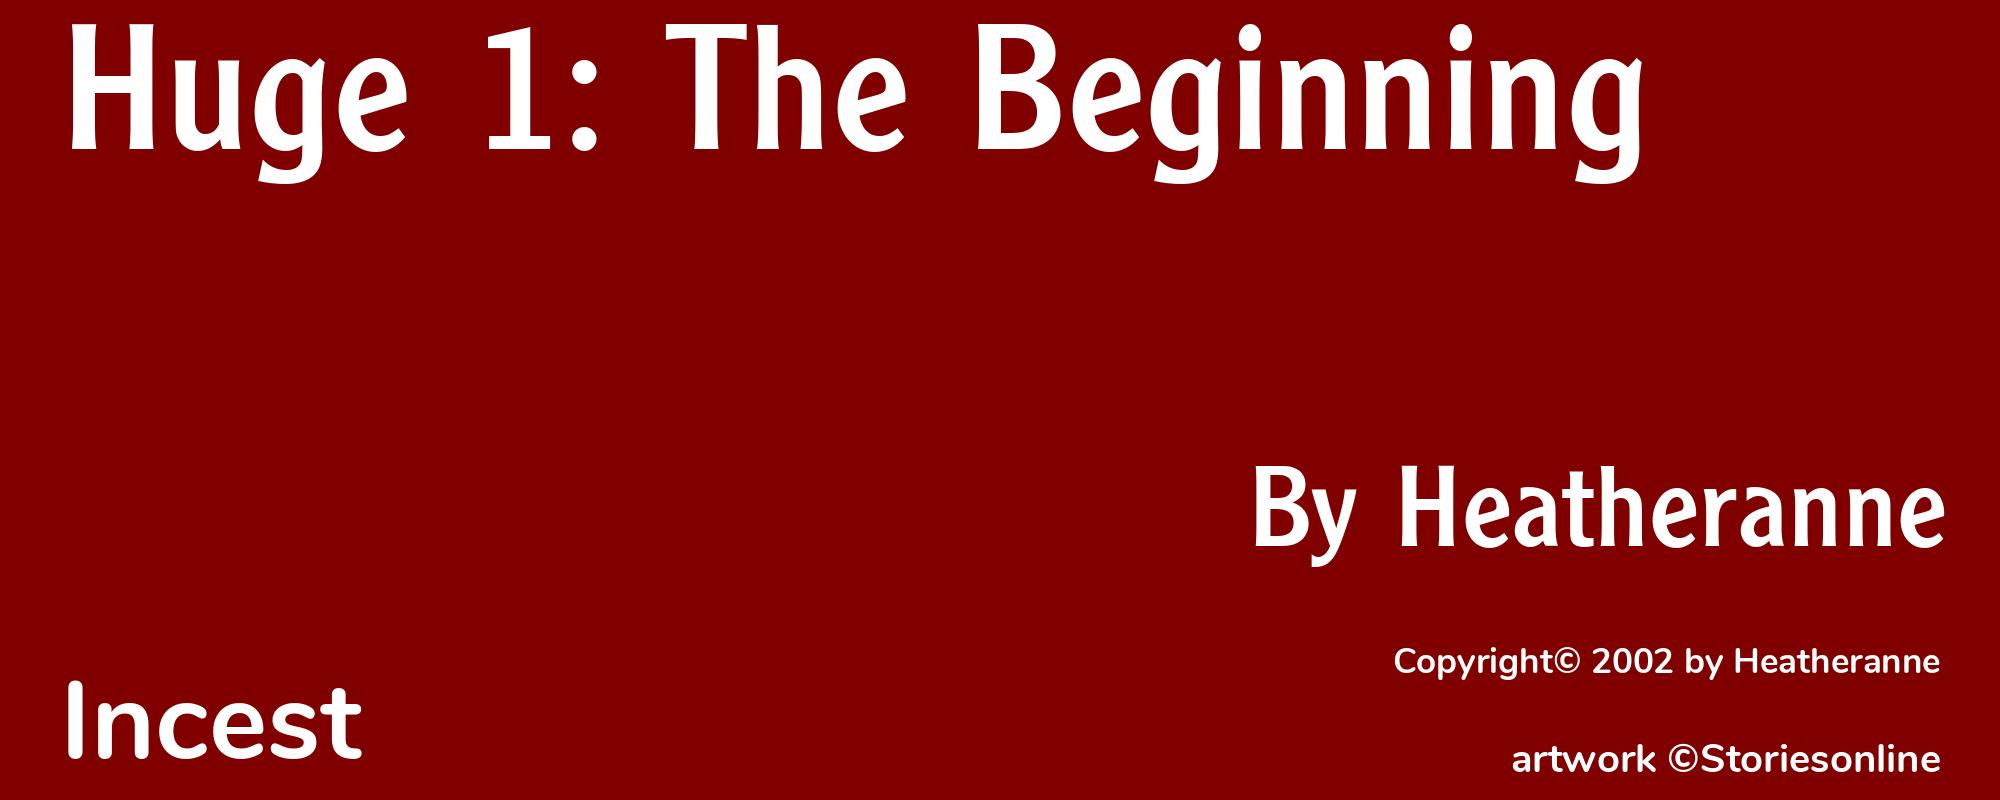 Huge 1: The Beginning - Cover